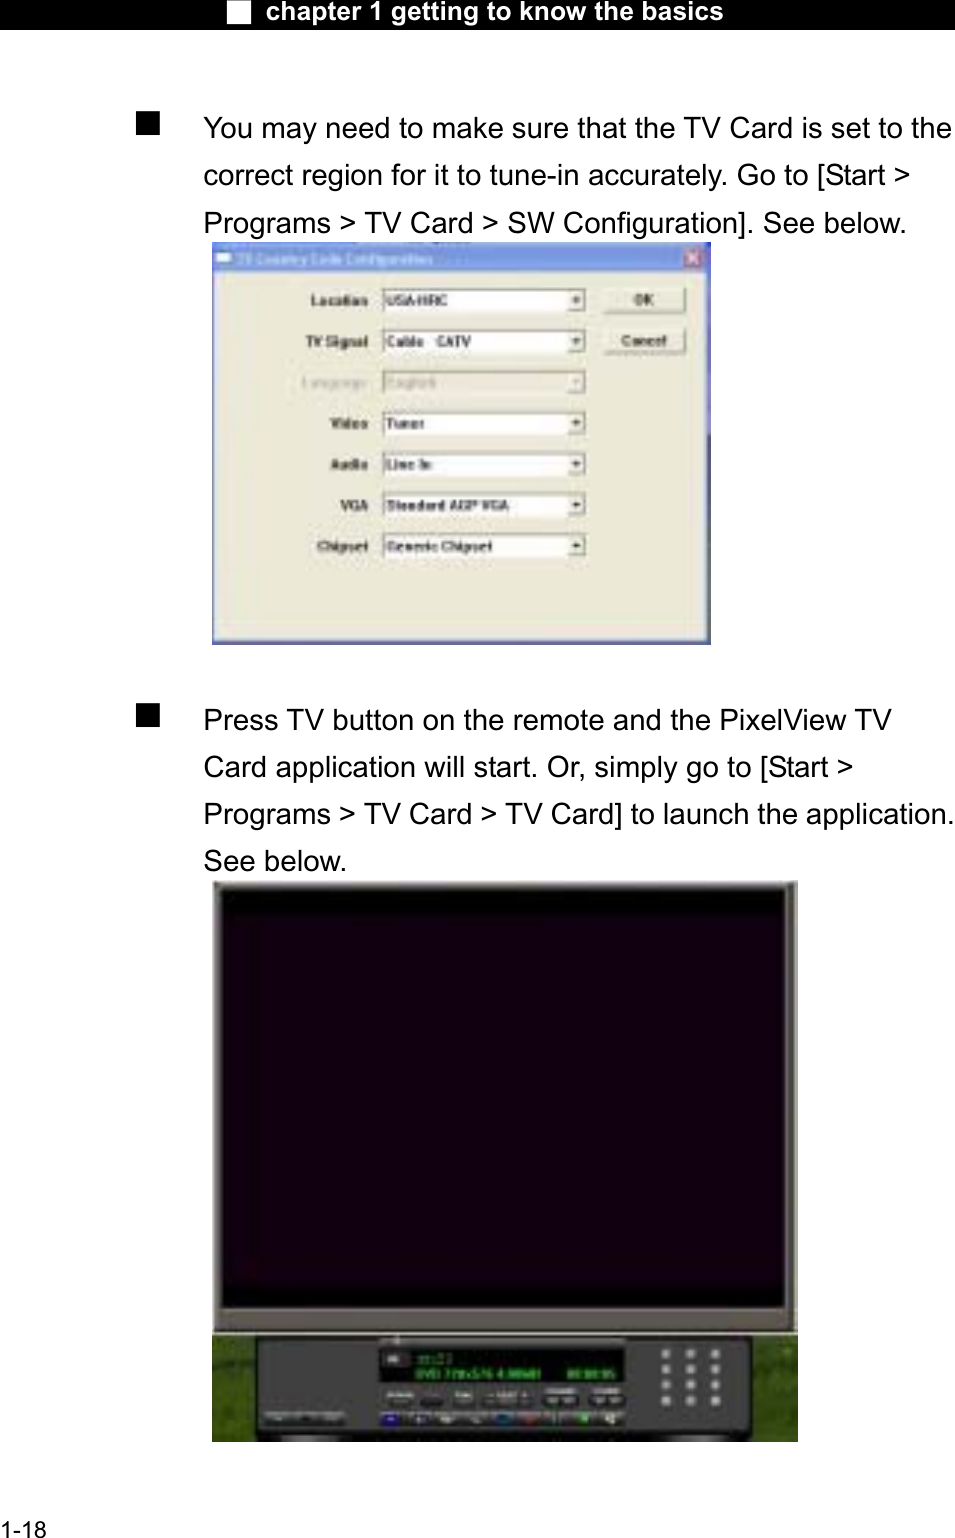 Ϯ chapter 1 getting to know the basicsYou may need to make sure that the TV Card is set to the correct region for it to tune-in accurately. Go to [Start &gt; Programs &gt; TV Card &gt; SW Configuration]. See below.Press TV button on the remote and the PixelView TVCard application will start. Or, simply go to [Start &gt; Programs &gt; TV Card &gt; TV Card] to launch the application.See below.1-18